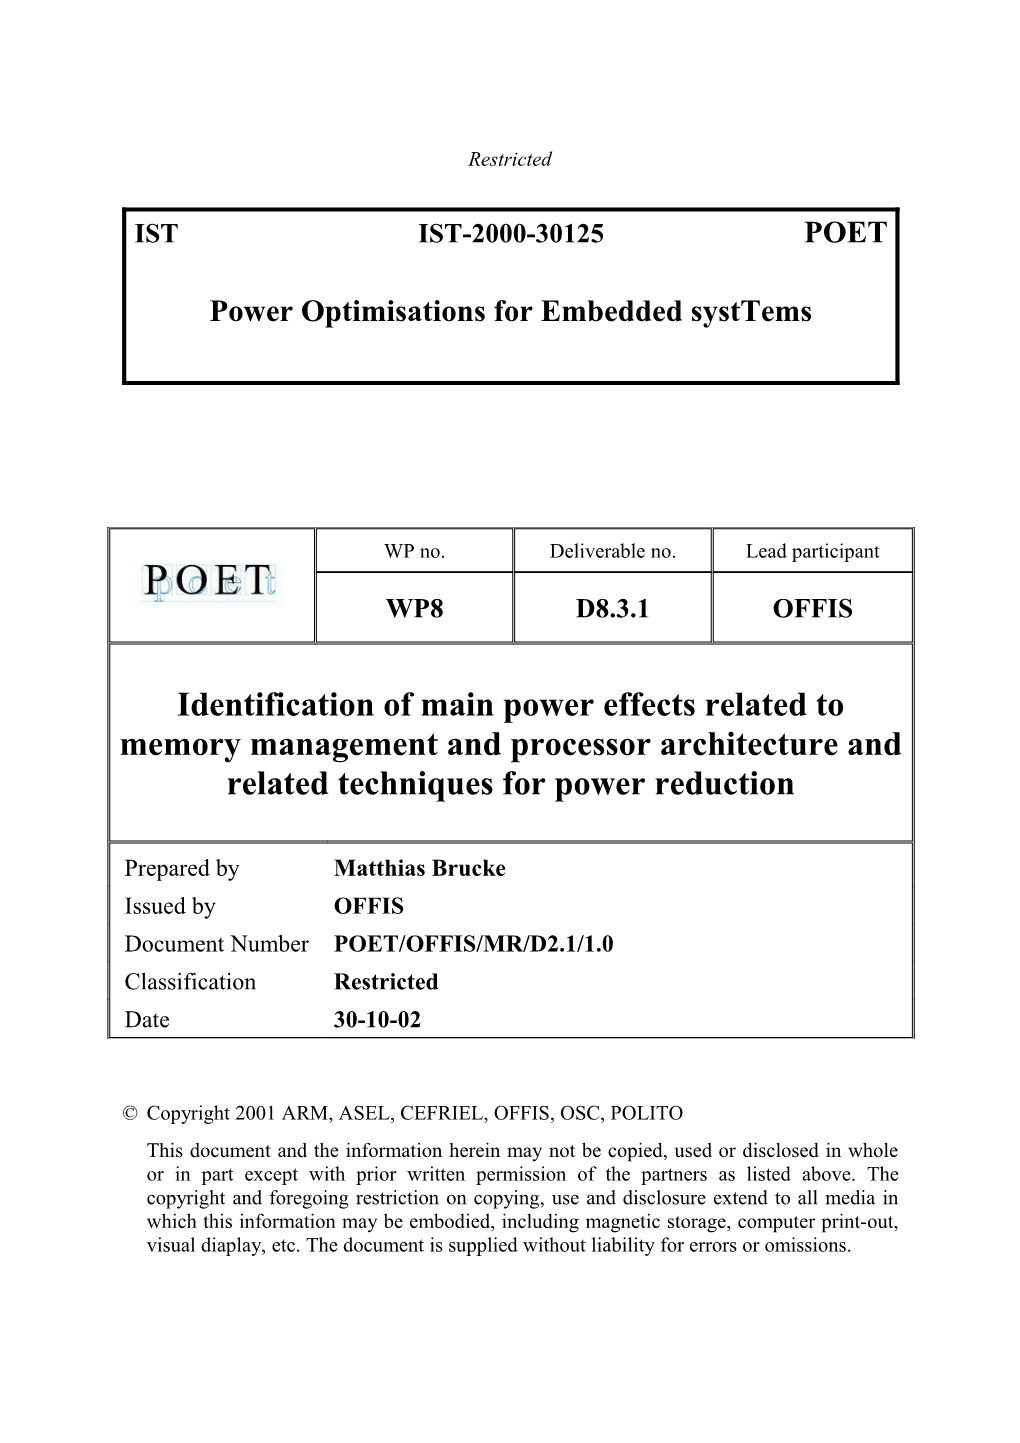 Identification of Main Power Effects Related to Memory Management and Processor Architecture